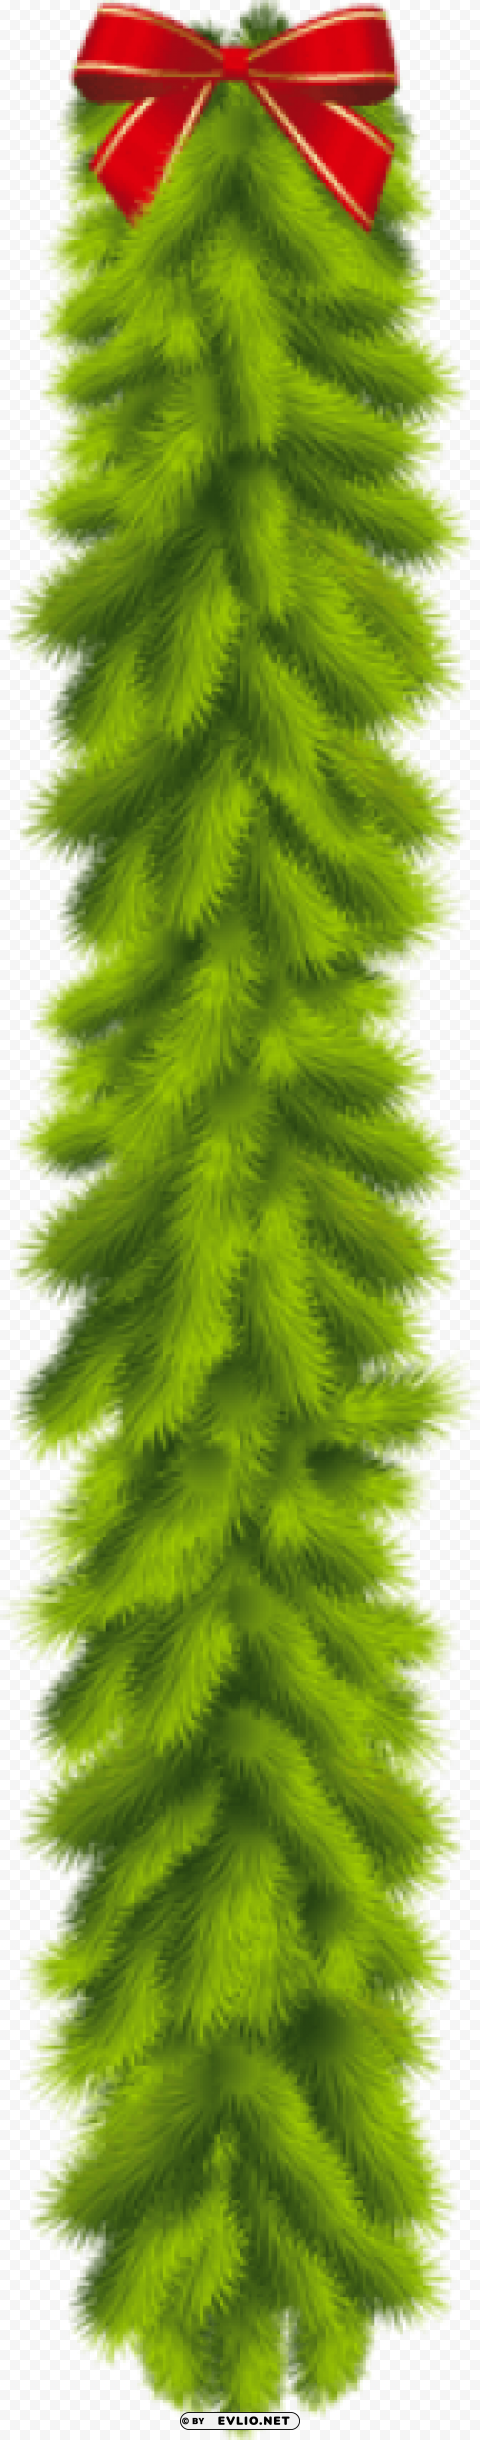 transparent christmas pine garland with red bow Clear PNG image